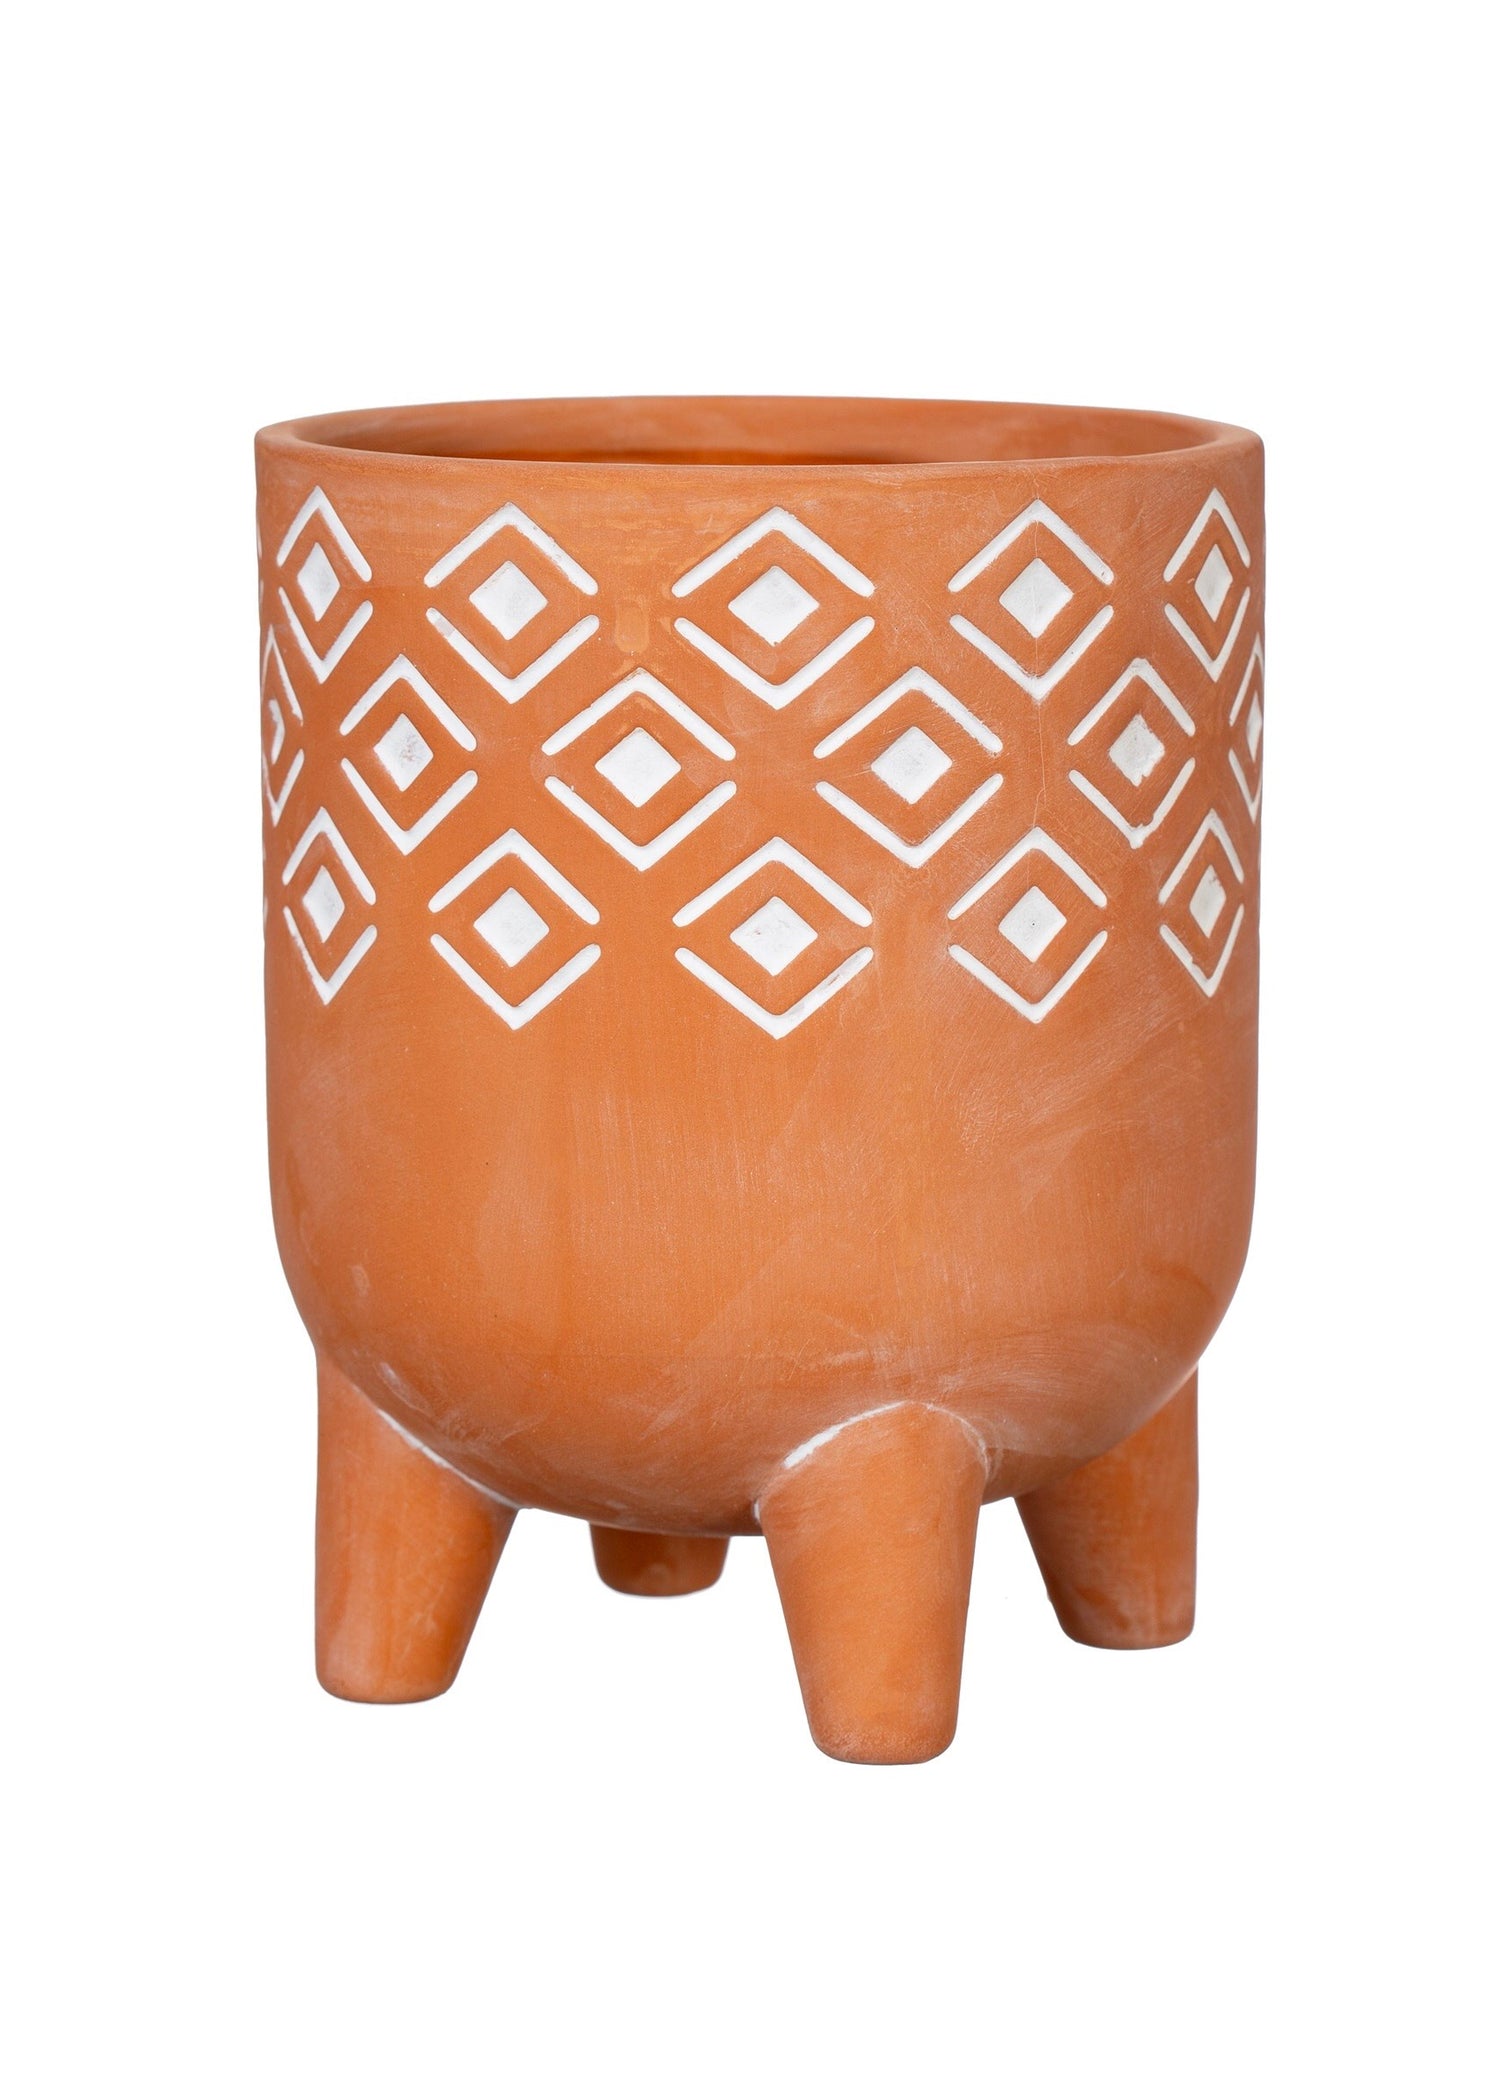 Terracota planter with legs and geometric white detailing 